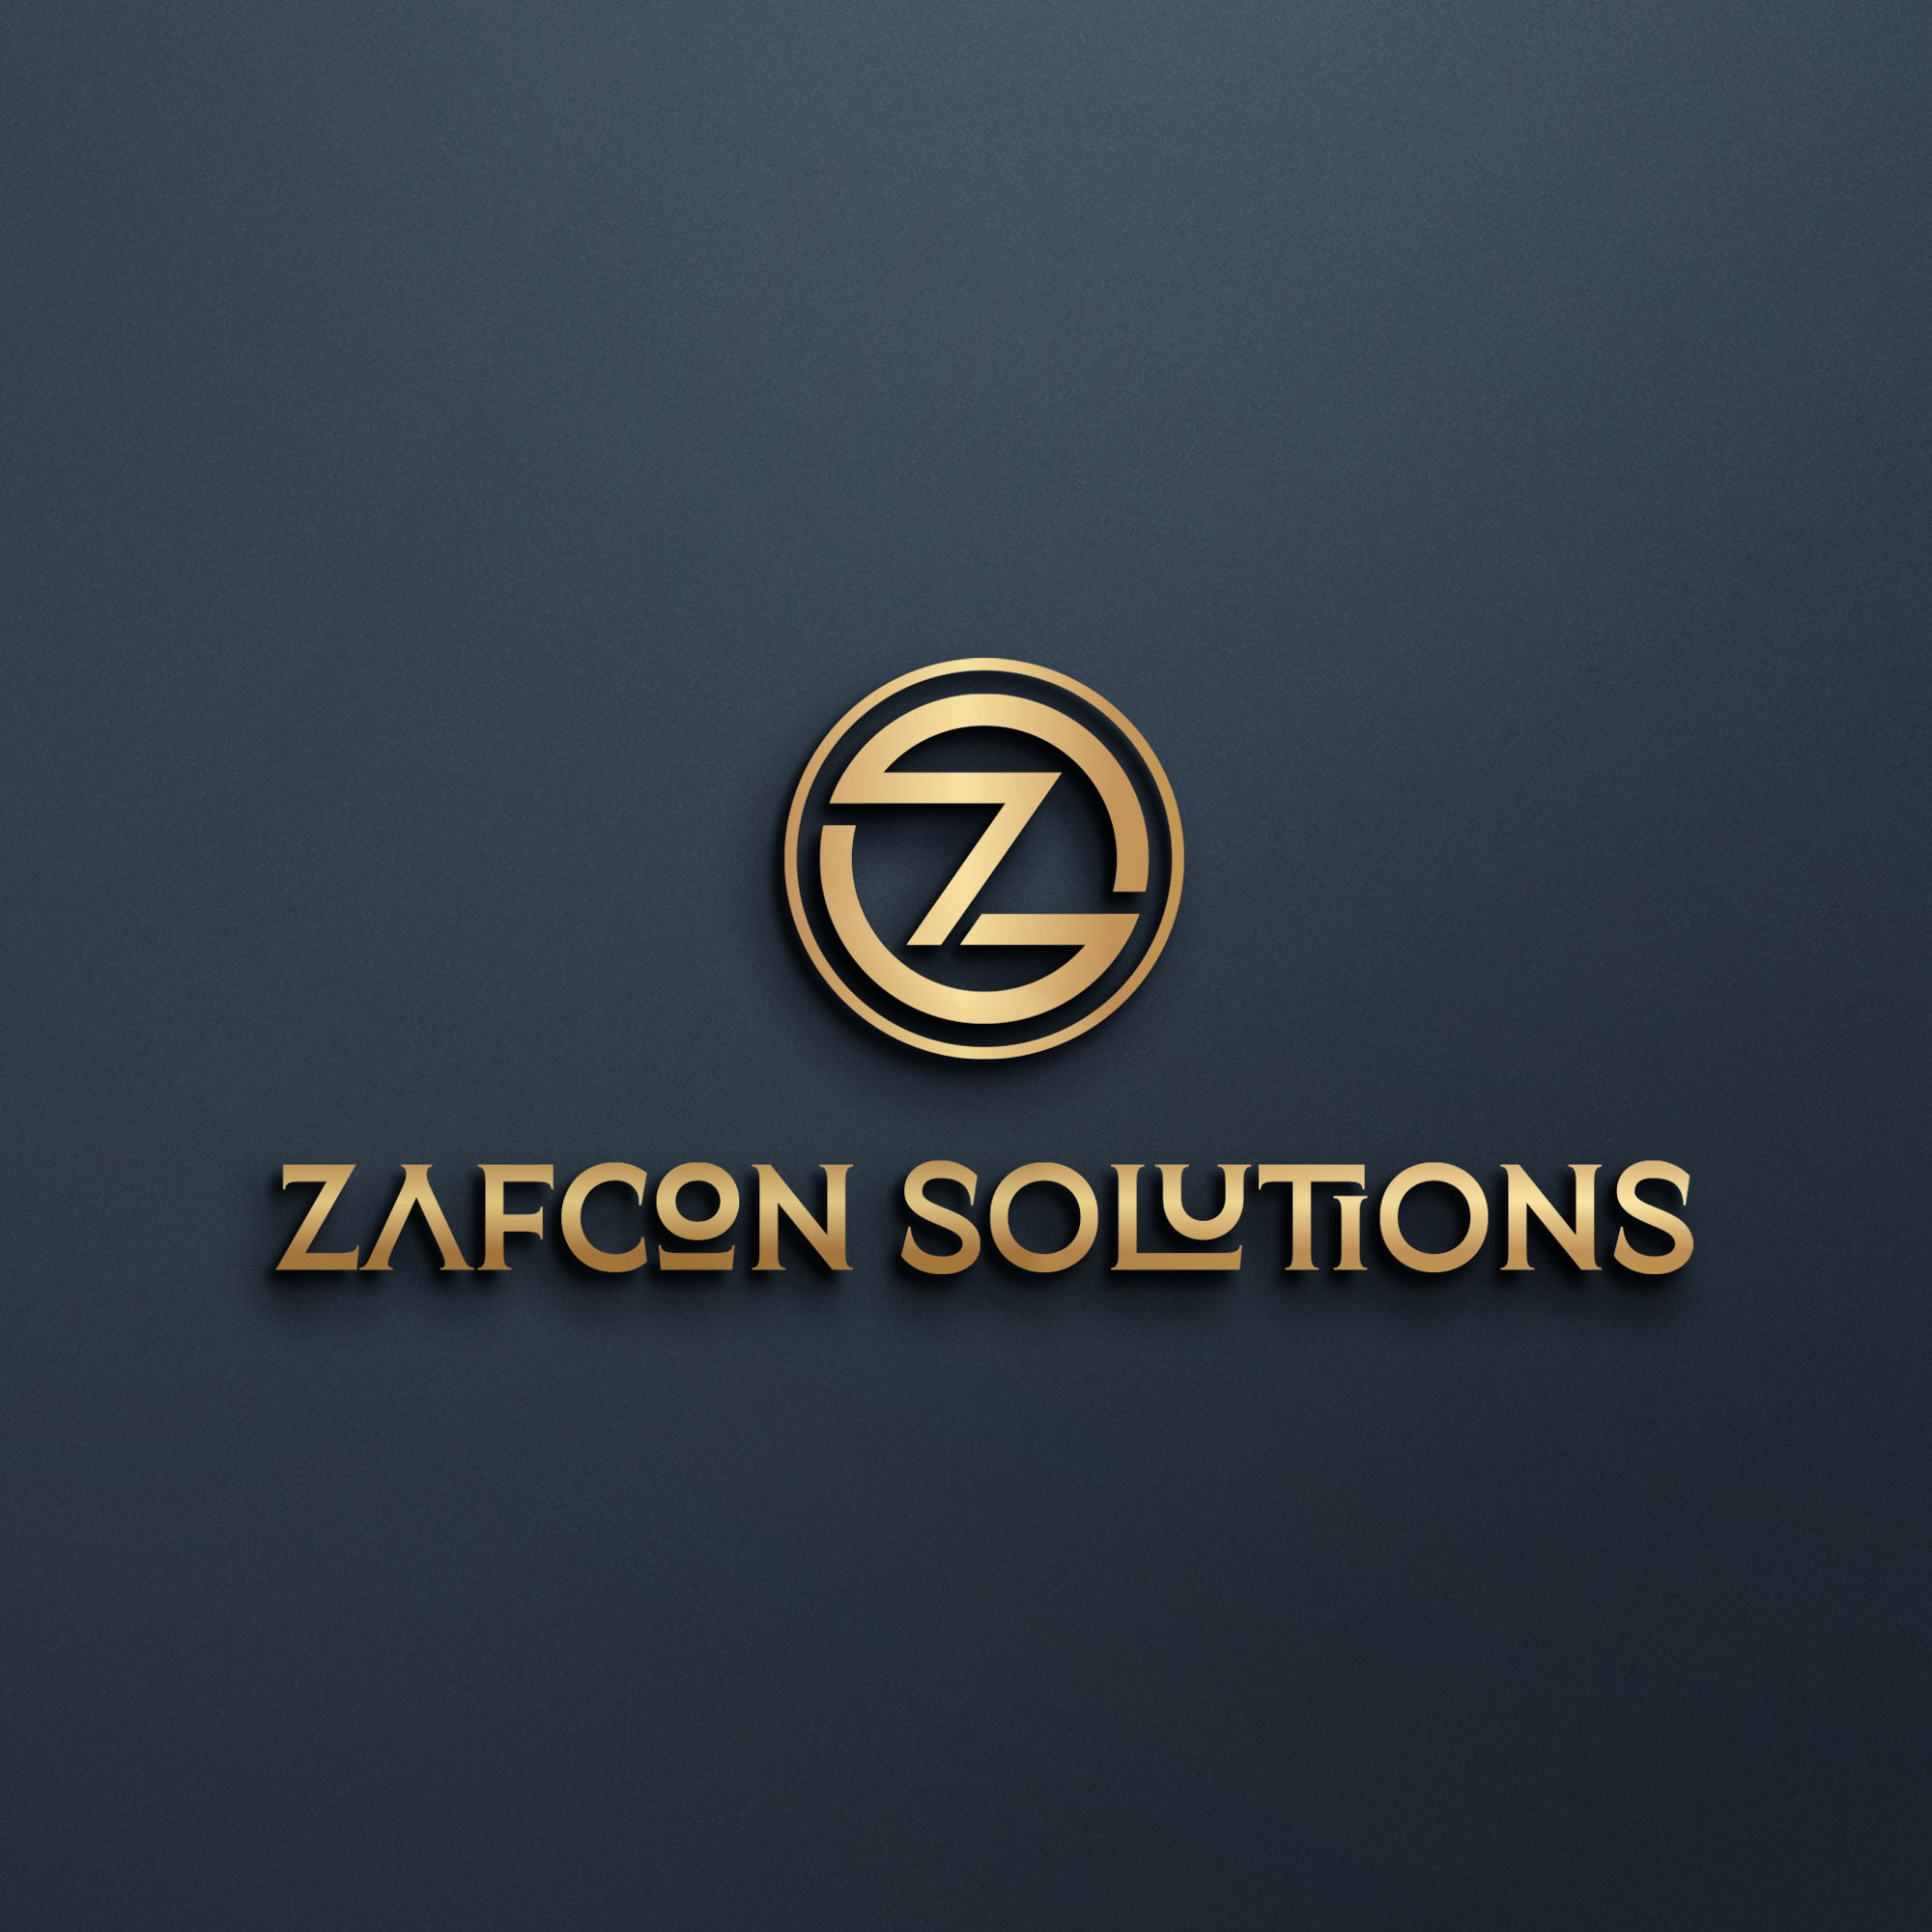 Zafcon Solutions